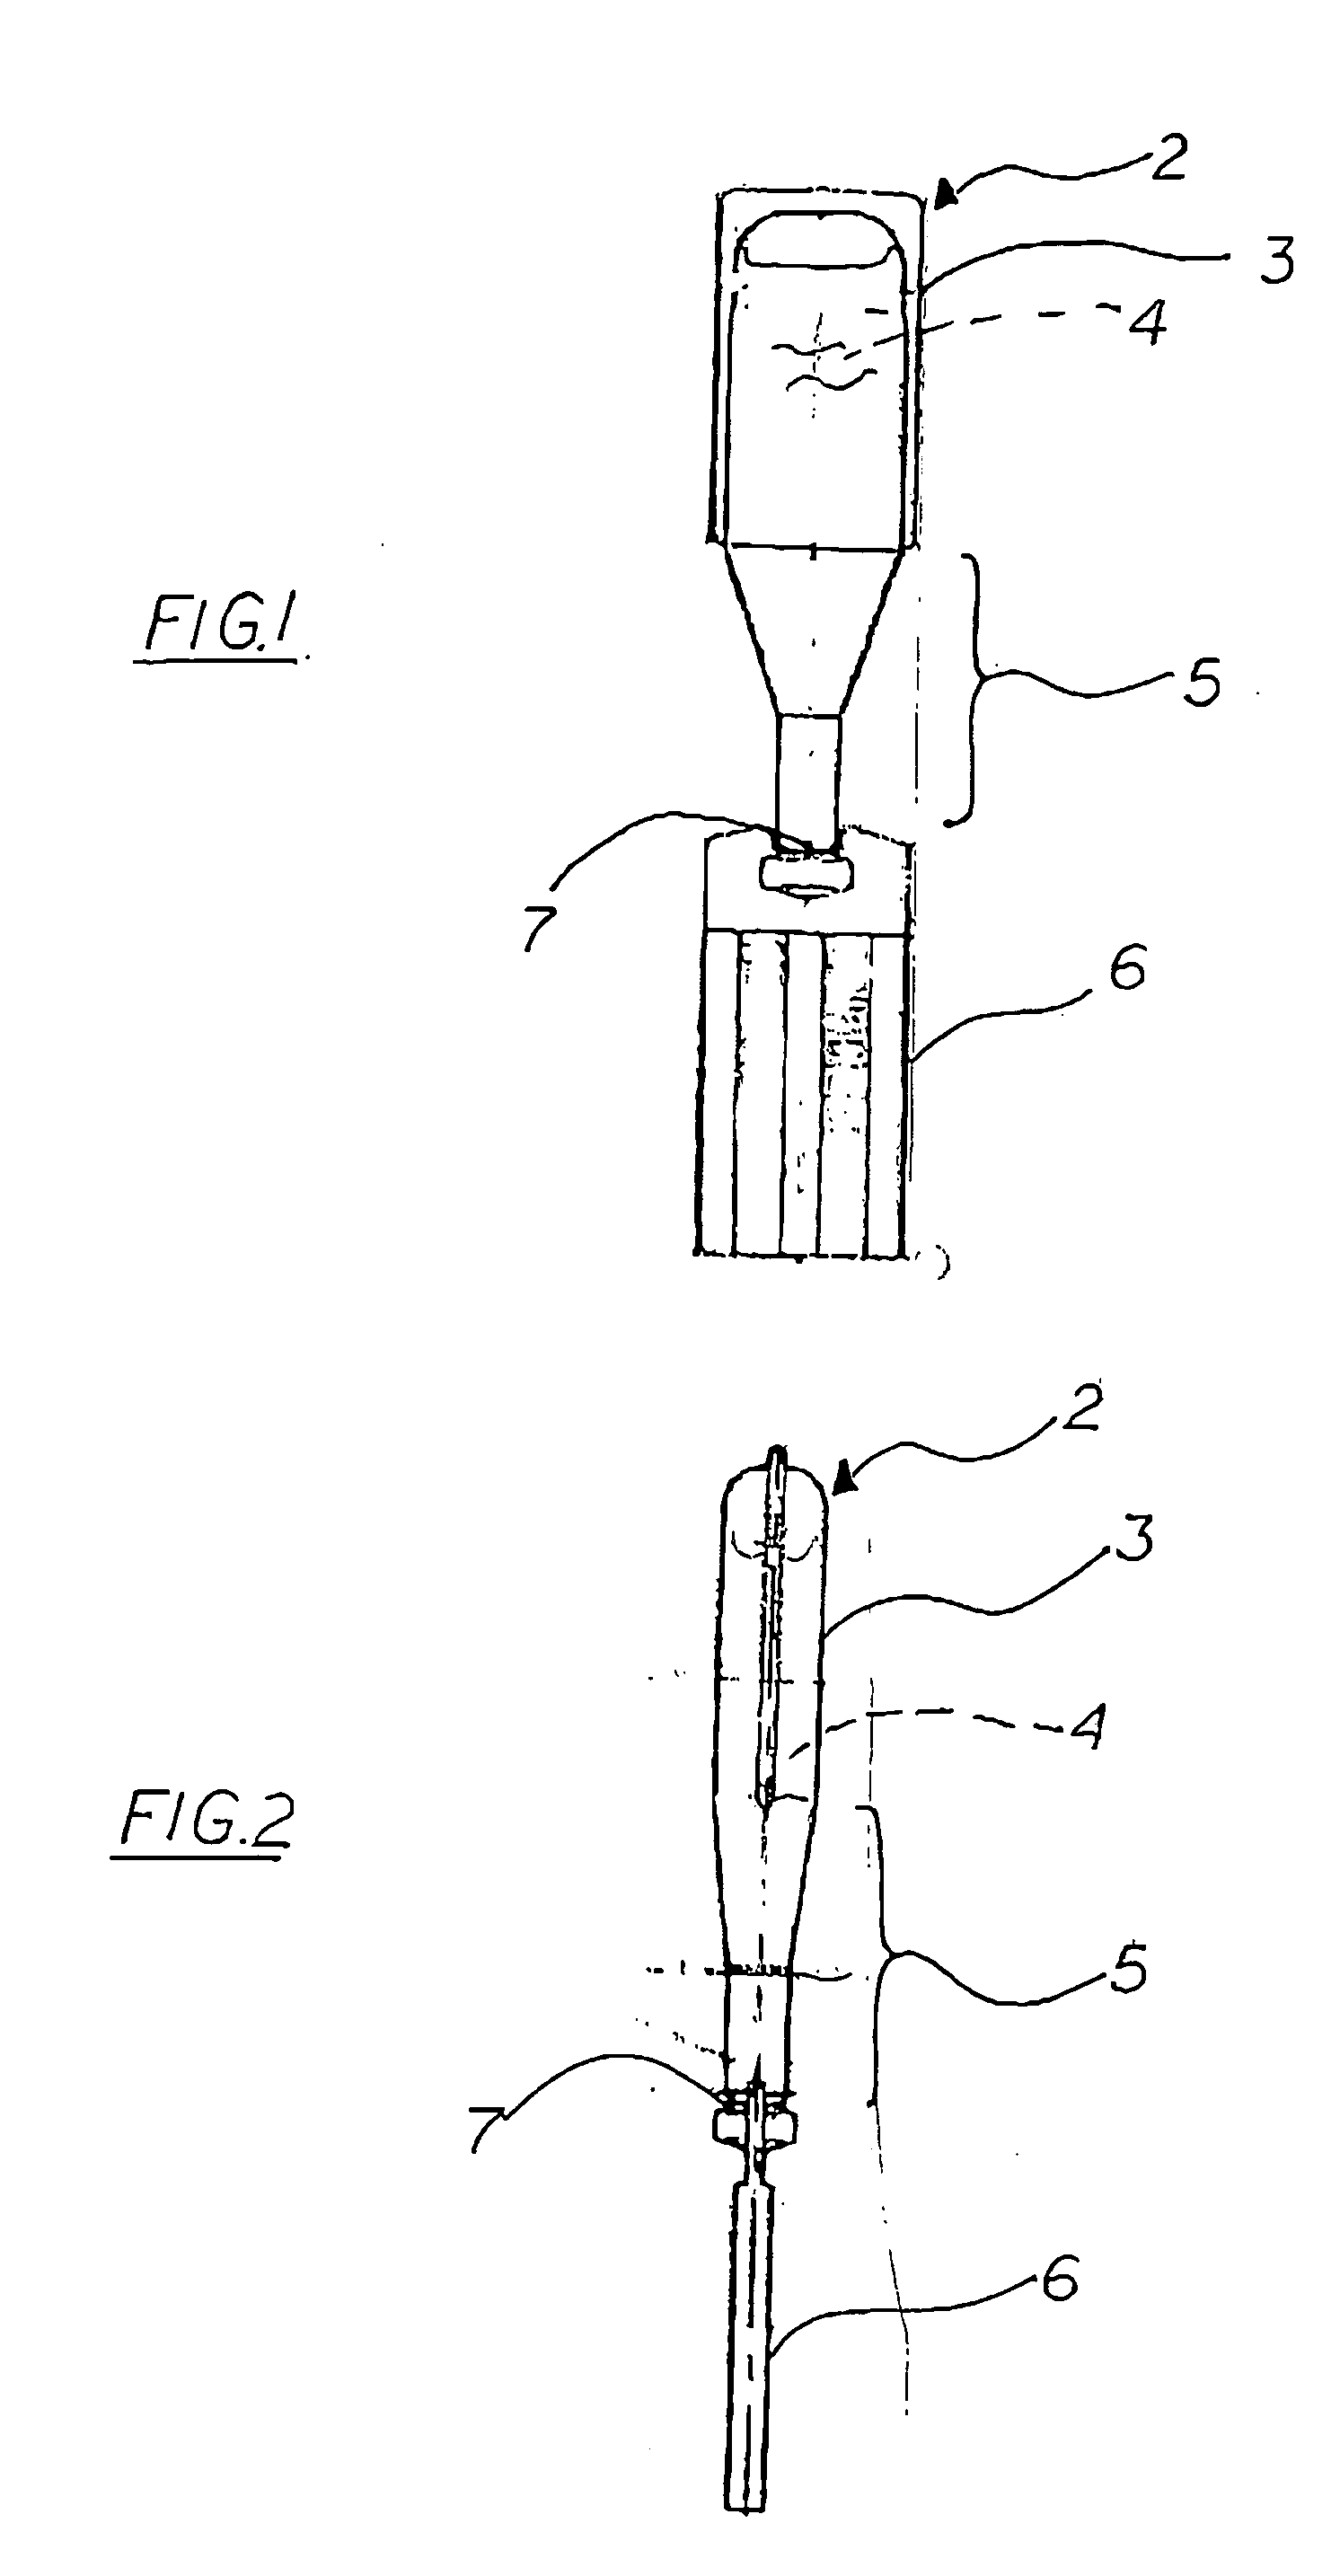 Ophthalmic surgery preparation system and method